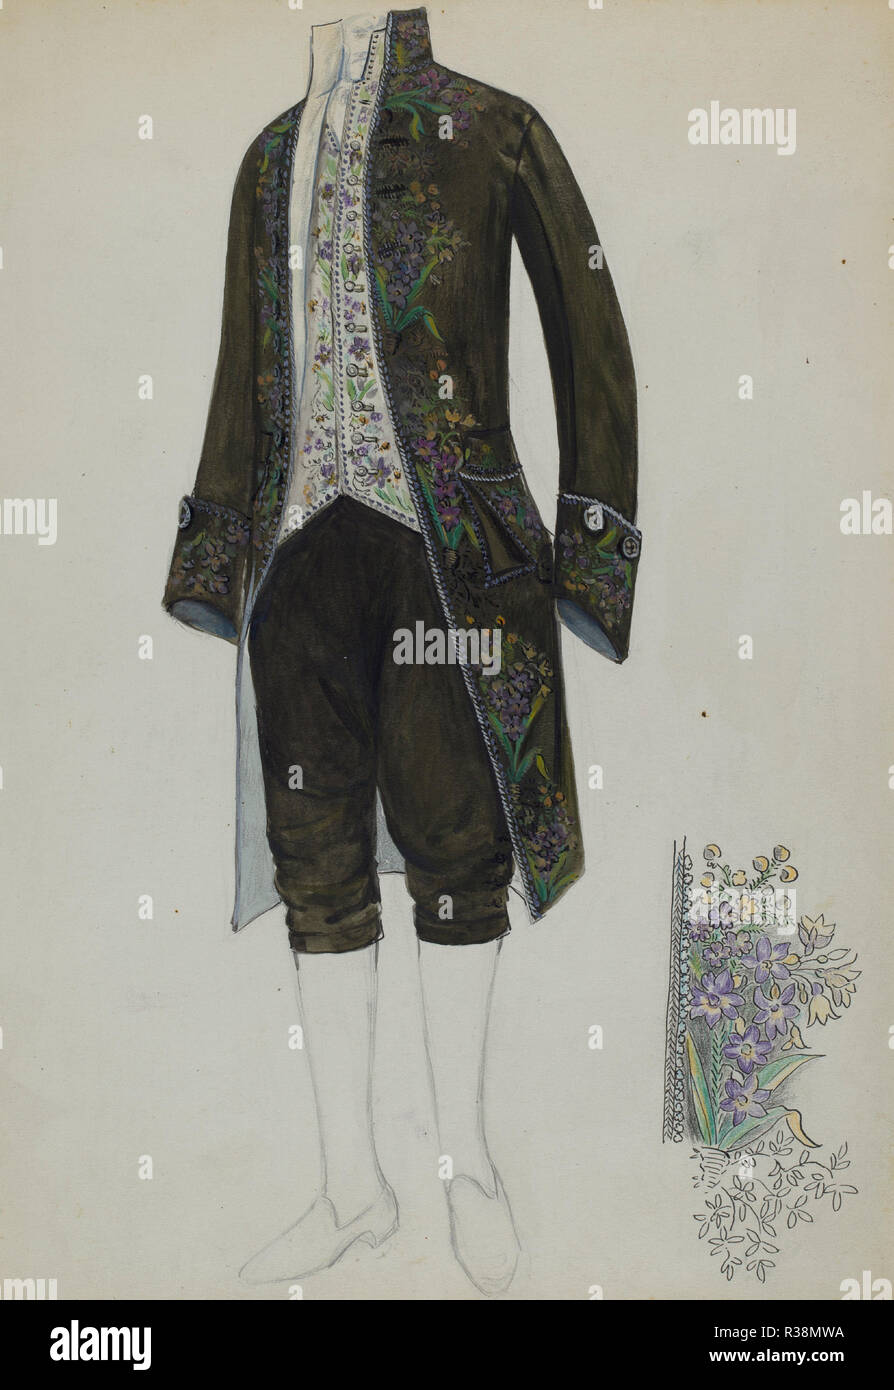 Man's Court Suit. Dated: c. 1936. Dimensions: overall: 30.5 x 23 cm (12 x 9 1/16 in.). Medium: watercolor, graphite, and colored pencil on paper. Museum: National Gallery of Art, Washington DC. Author: Jessie M. Benge. Stock Photo